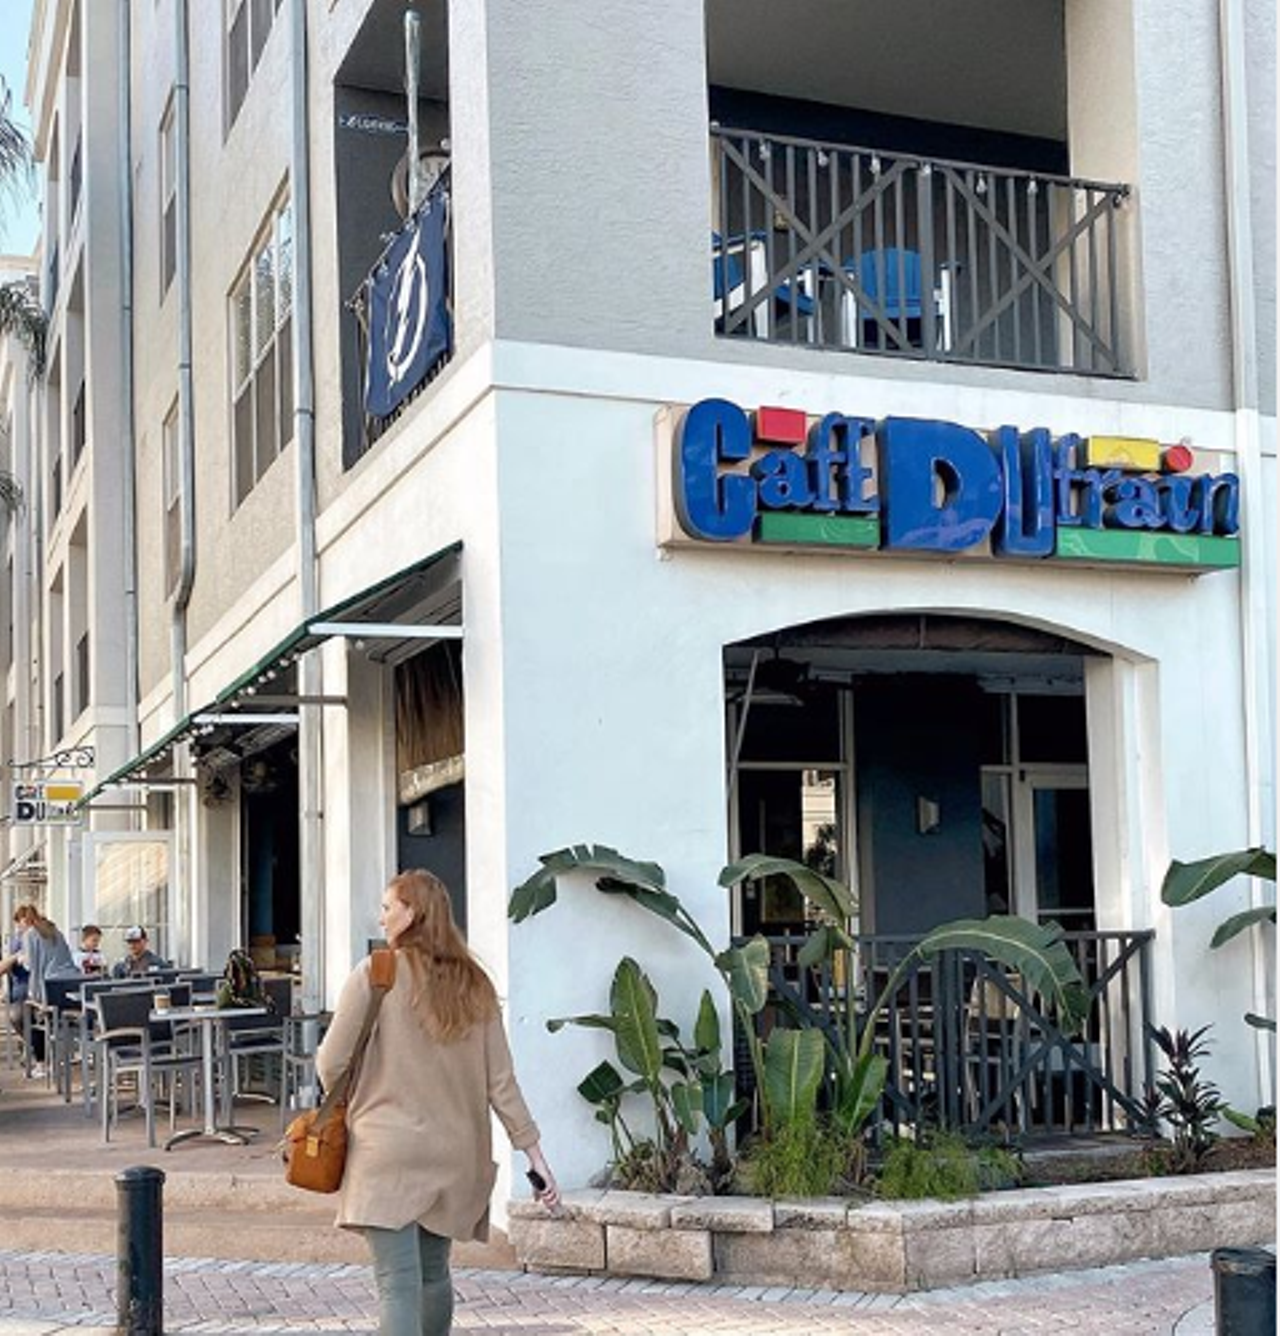 Cafe Dufrain
707 Harbour Post Drive, Tampa. 813-275-9701
Cafe Dufrain is still offering takeout. If your order is $50 or more, you&#146;ll receive a $10 gift card redeemable at Cafe Dufrain, Watervue Grille and Cry Baby Cafe. 
Photo via  Cafe Dufrain&#146;s Instagram